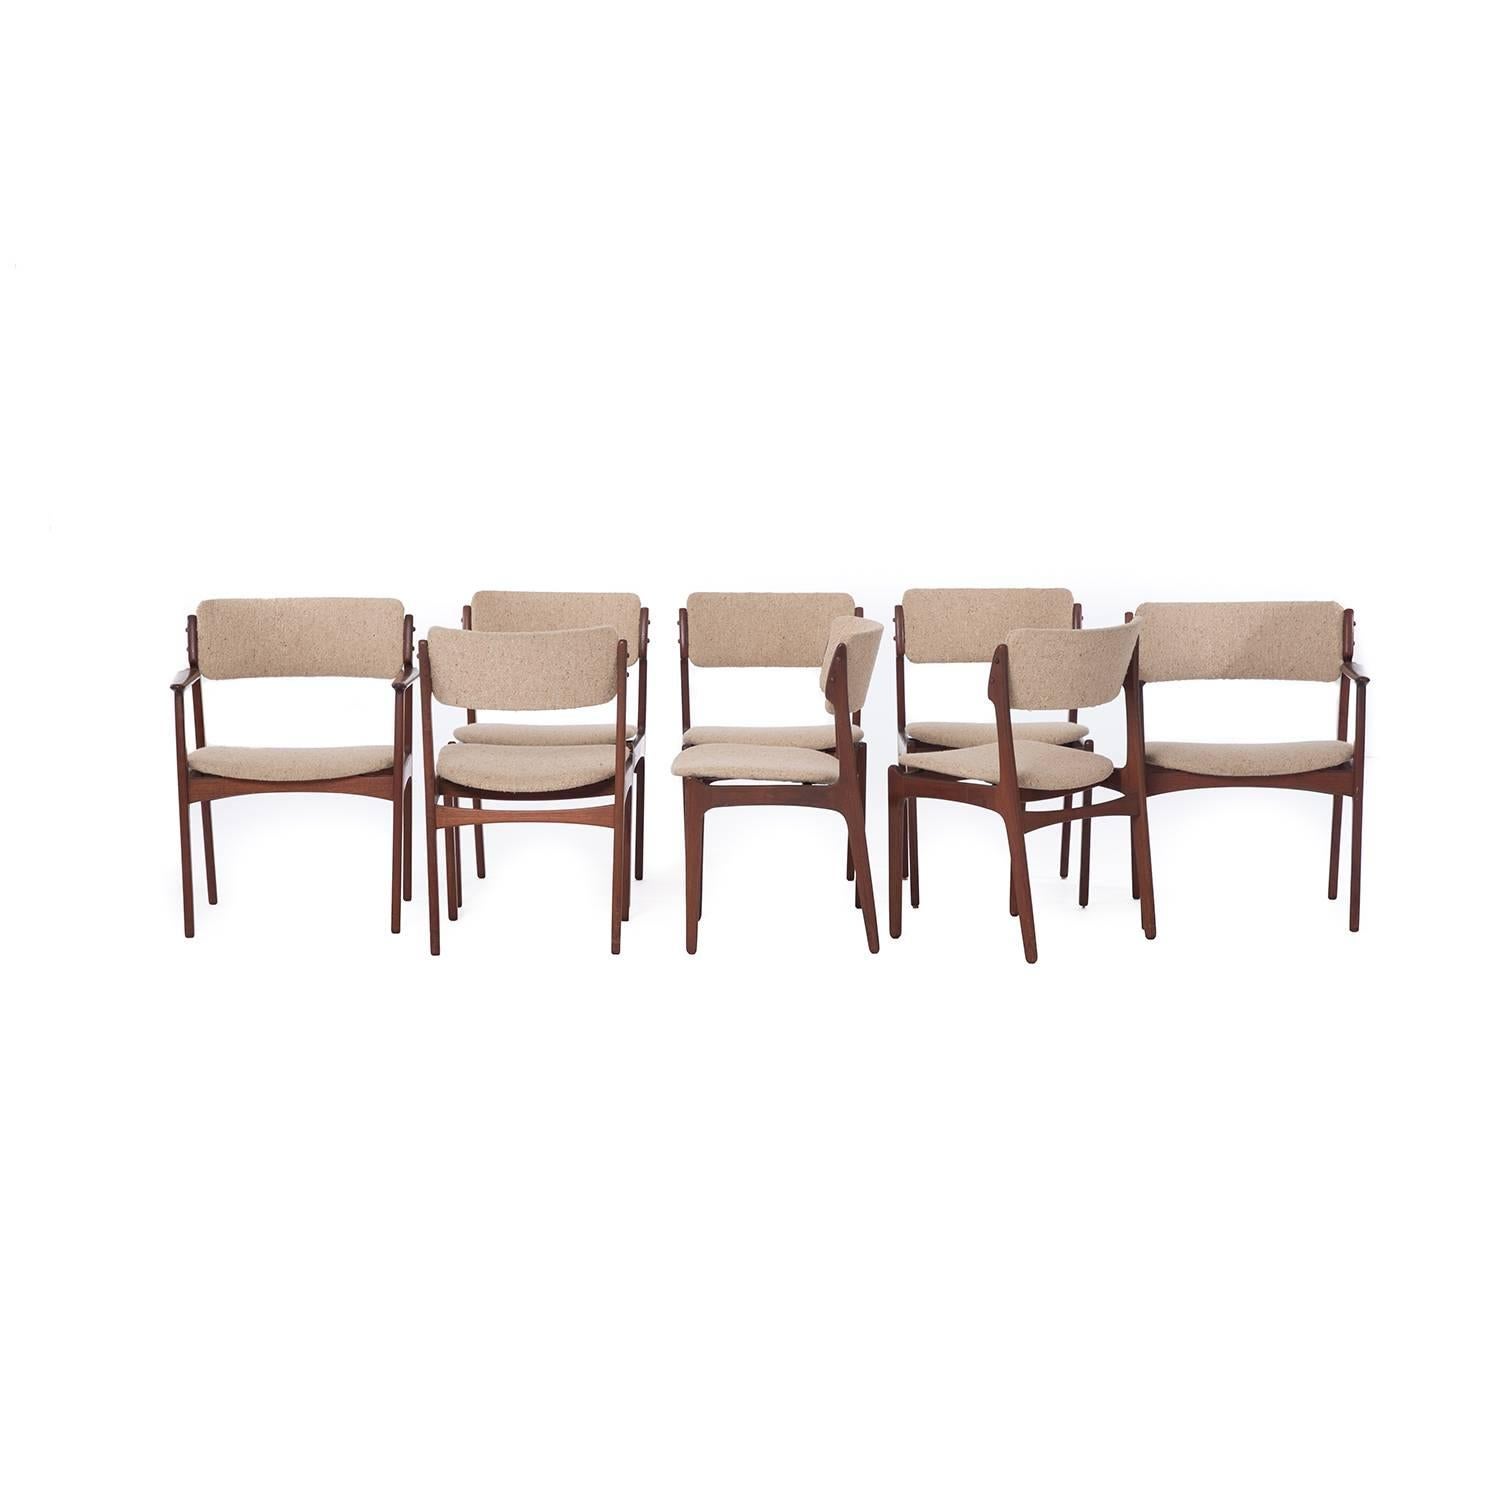 This set of eight-teak Erik Buch chairs includes two-arm chairs and six side chairs.